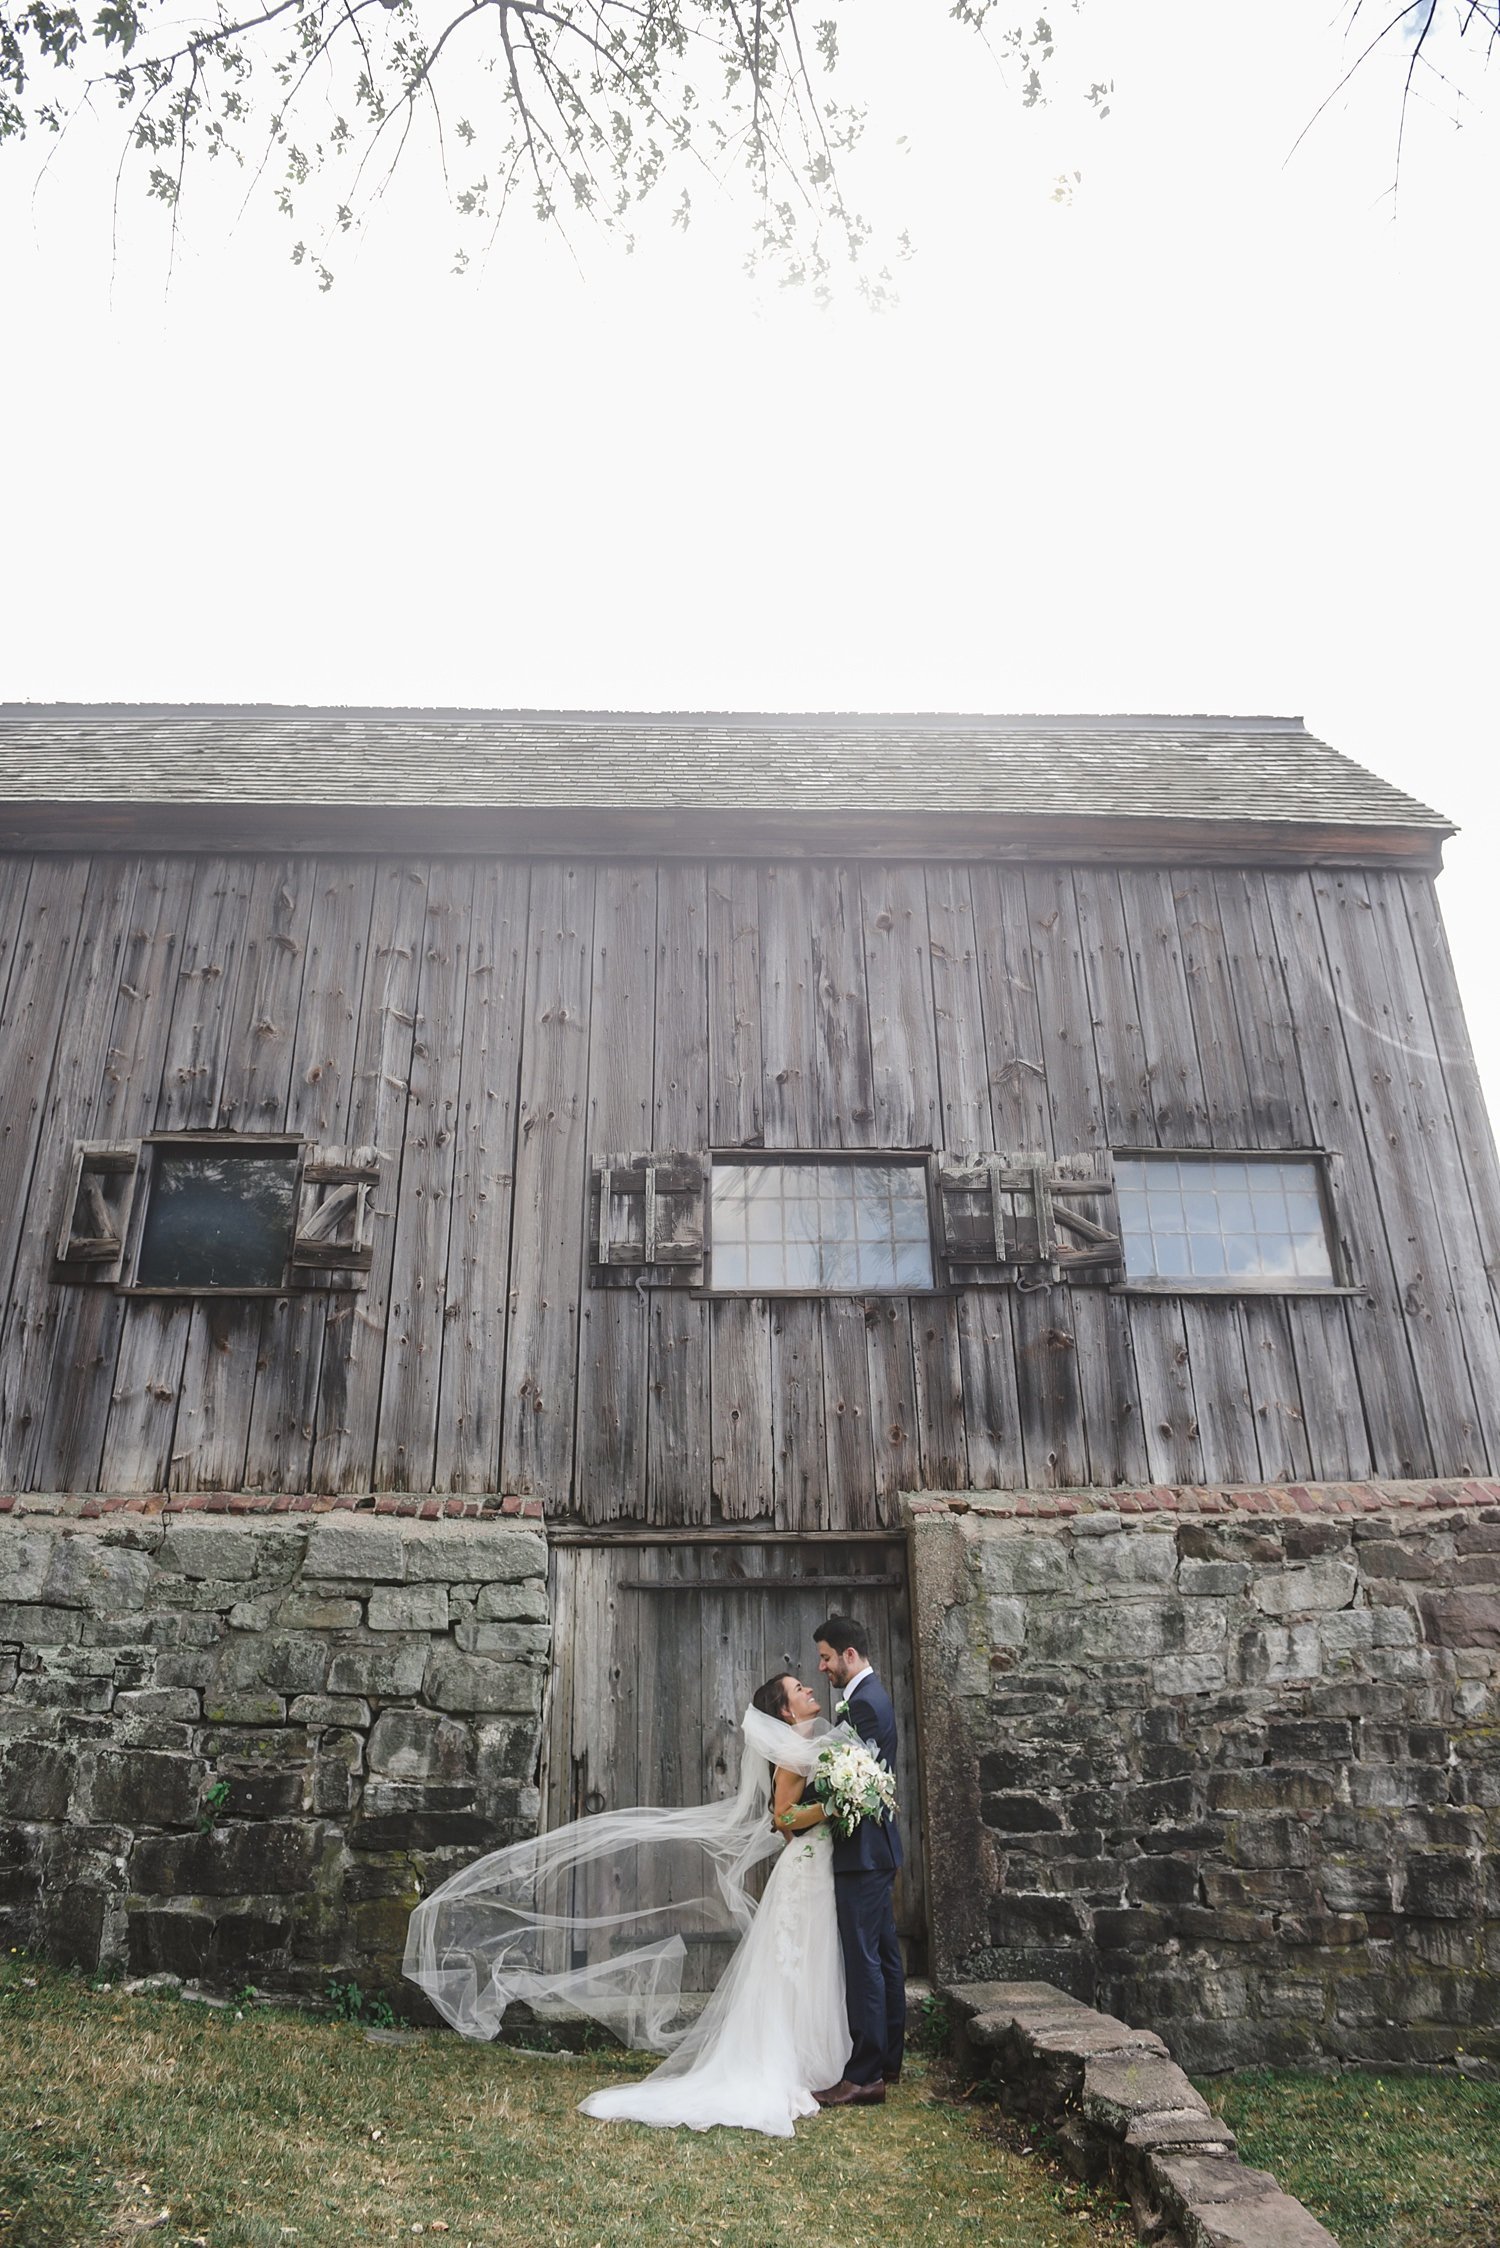 Bride and groom portraits at The Webb Barn in Wethersfield, CT